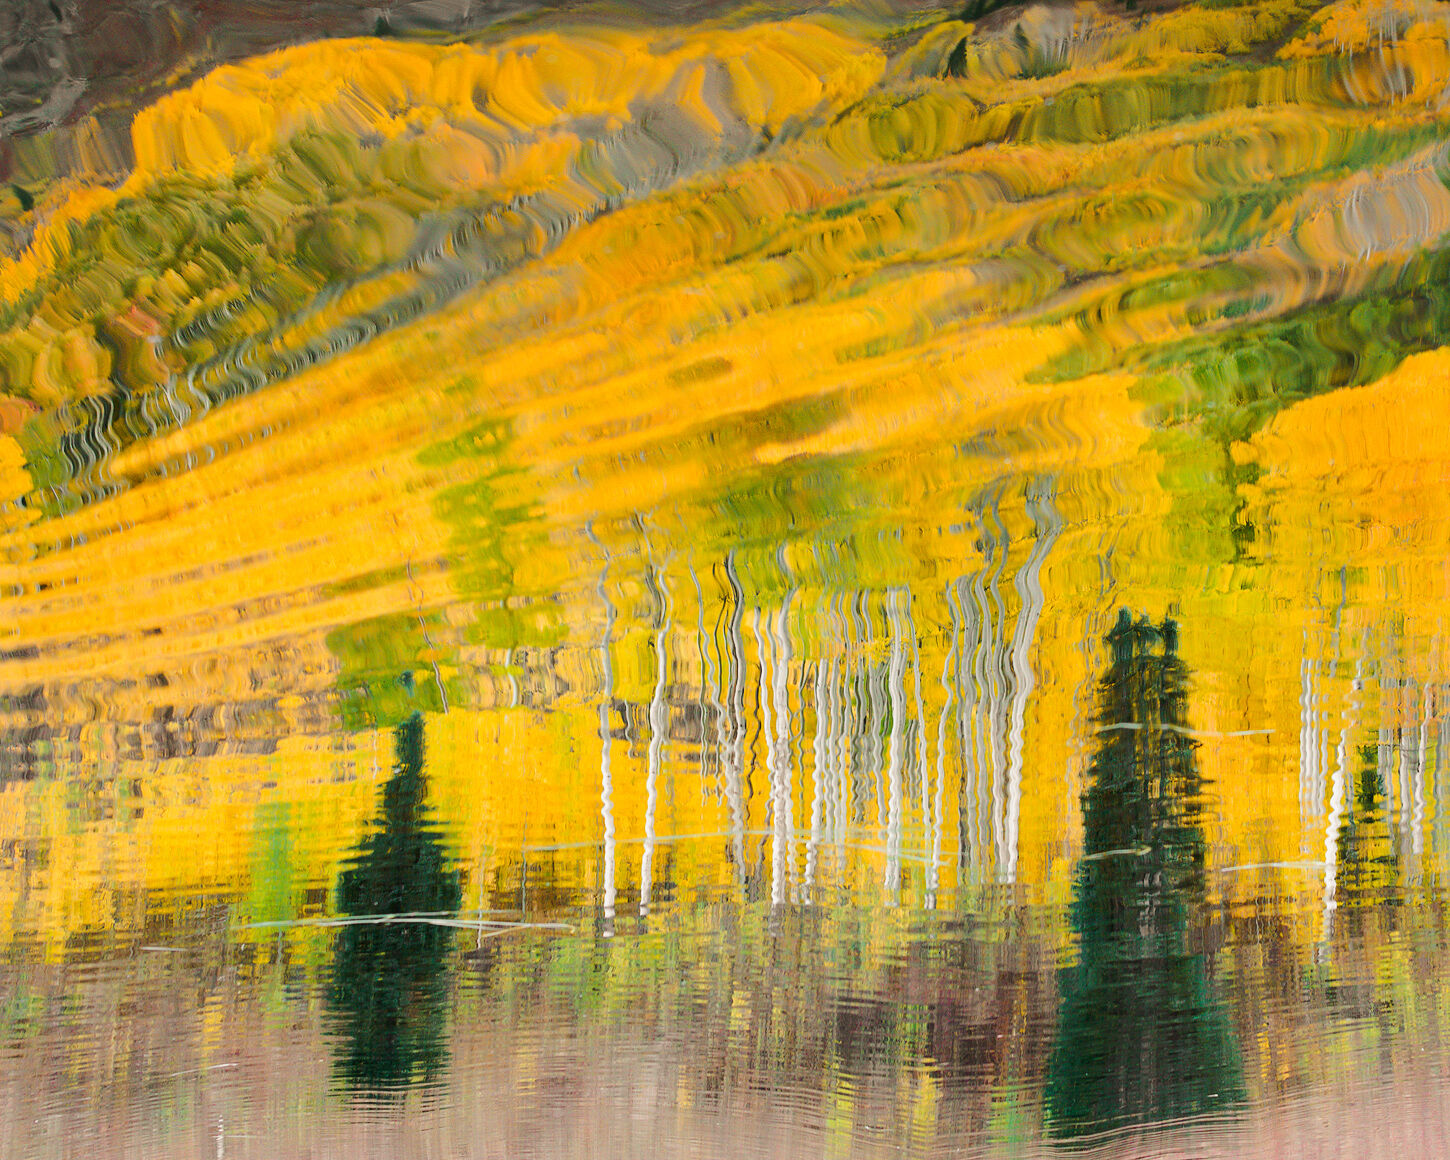 A reflection of aspen trees and blue Spruce. The photo has been inverted right side up.